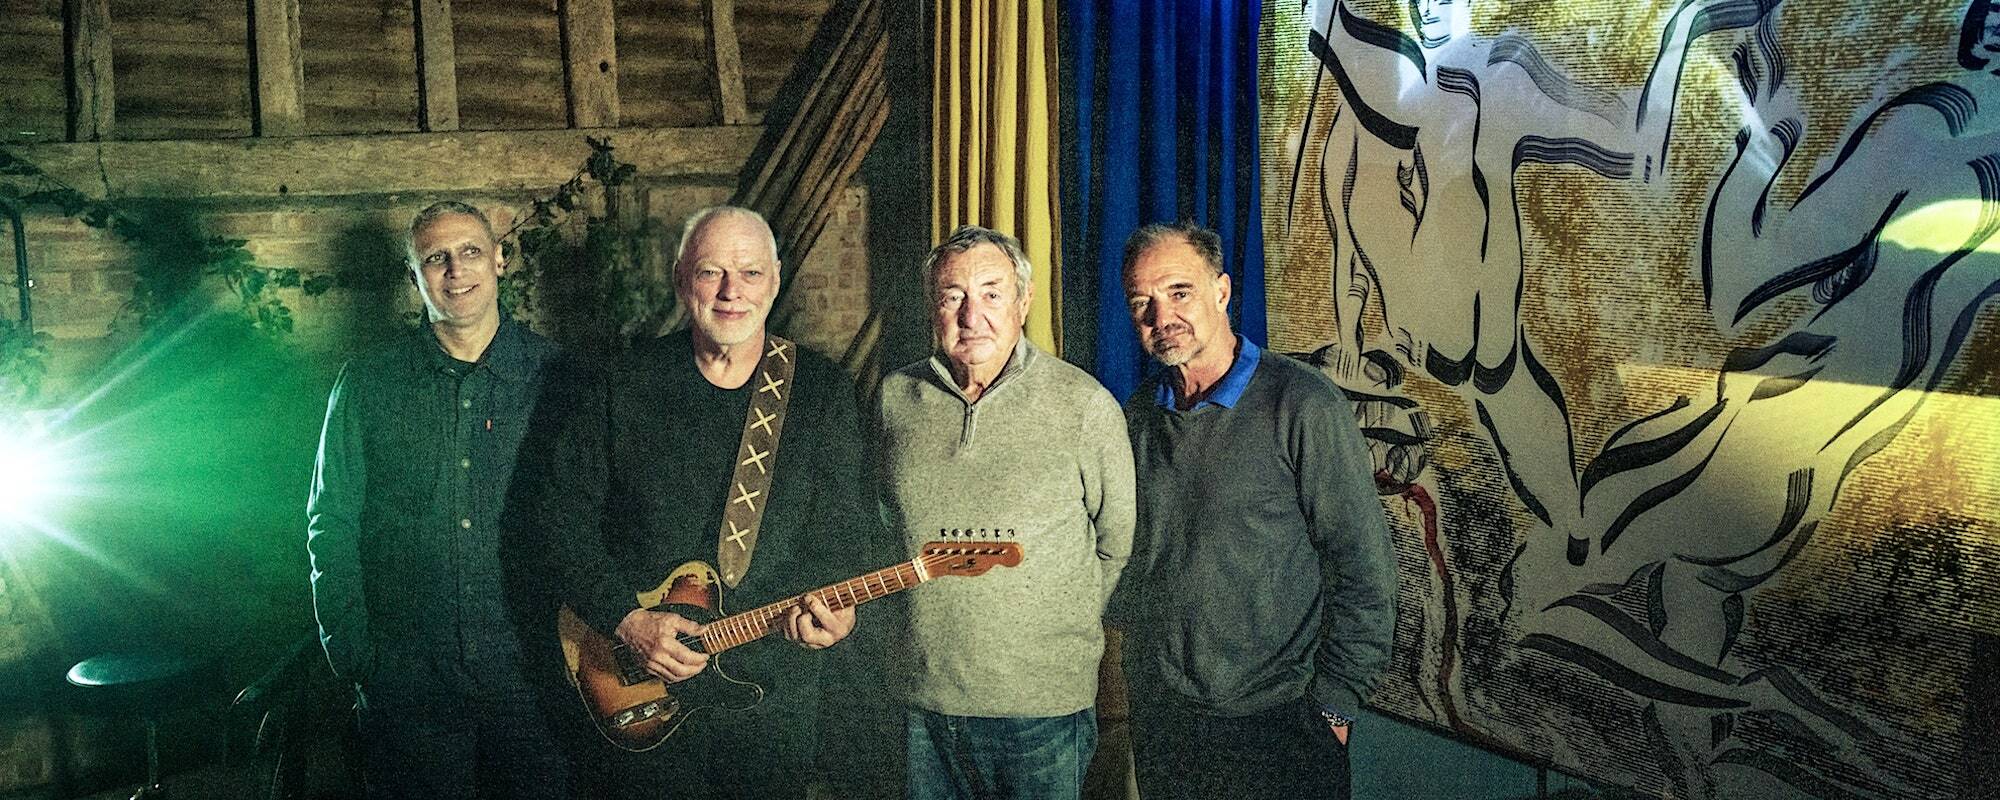 Pink Floyd Release First New Song in Nearly 30 Years for Ukraine